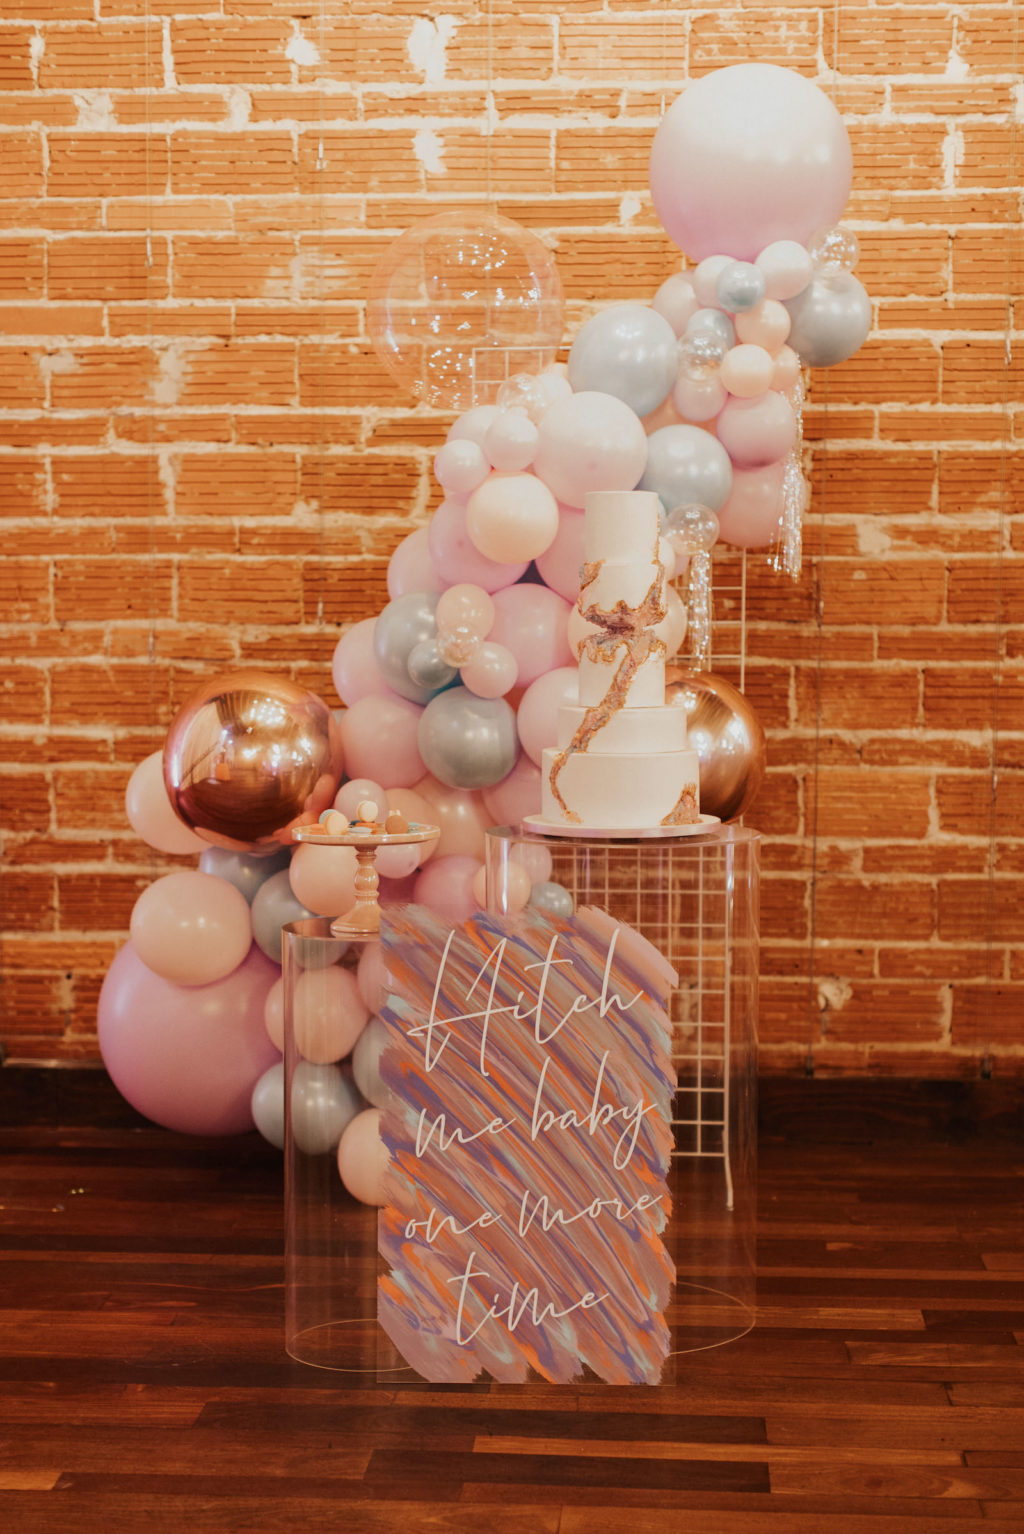 Iridescent Pastel 90's Wedding Inspiration | Pastel Pink Peach Silver Rose Gold Balloon Installation | Round Five Tier Fondant Wedding Cake with Iridescent Geod Sugar Crystals and Rainbow Macarons on Clear Acrylic Table